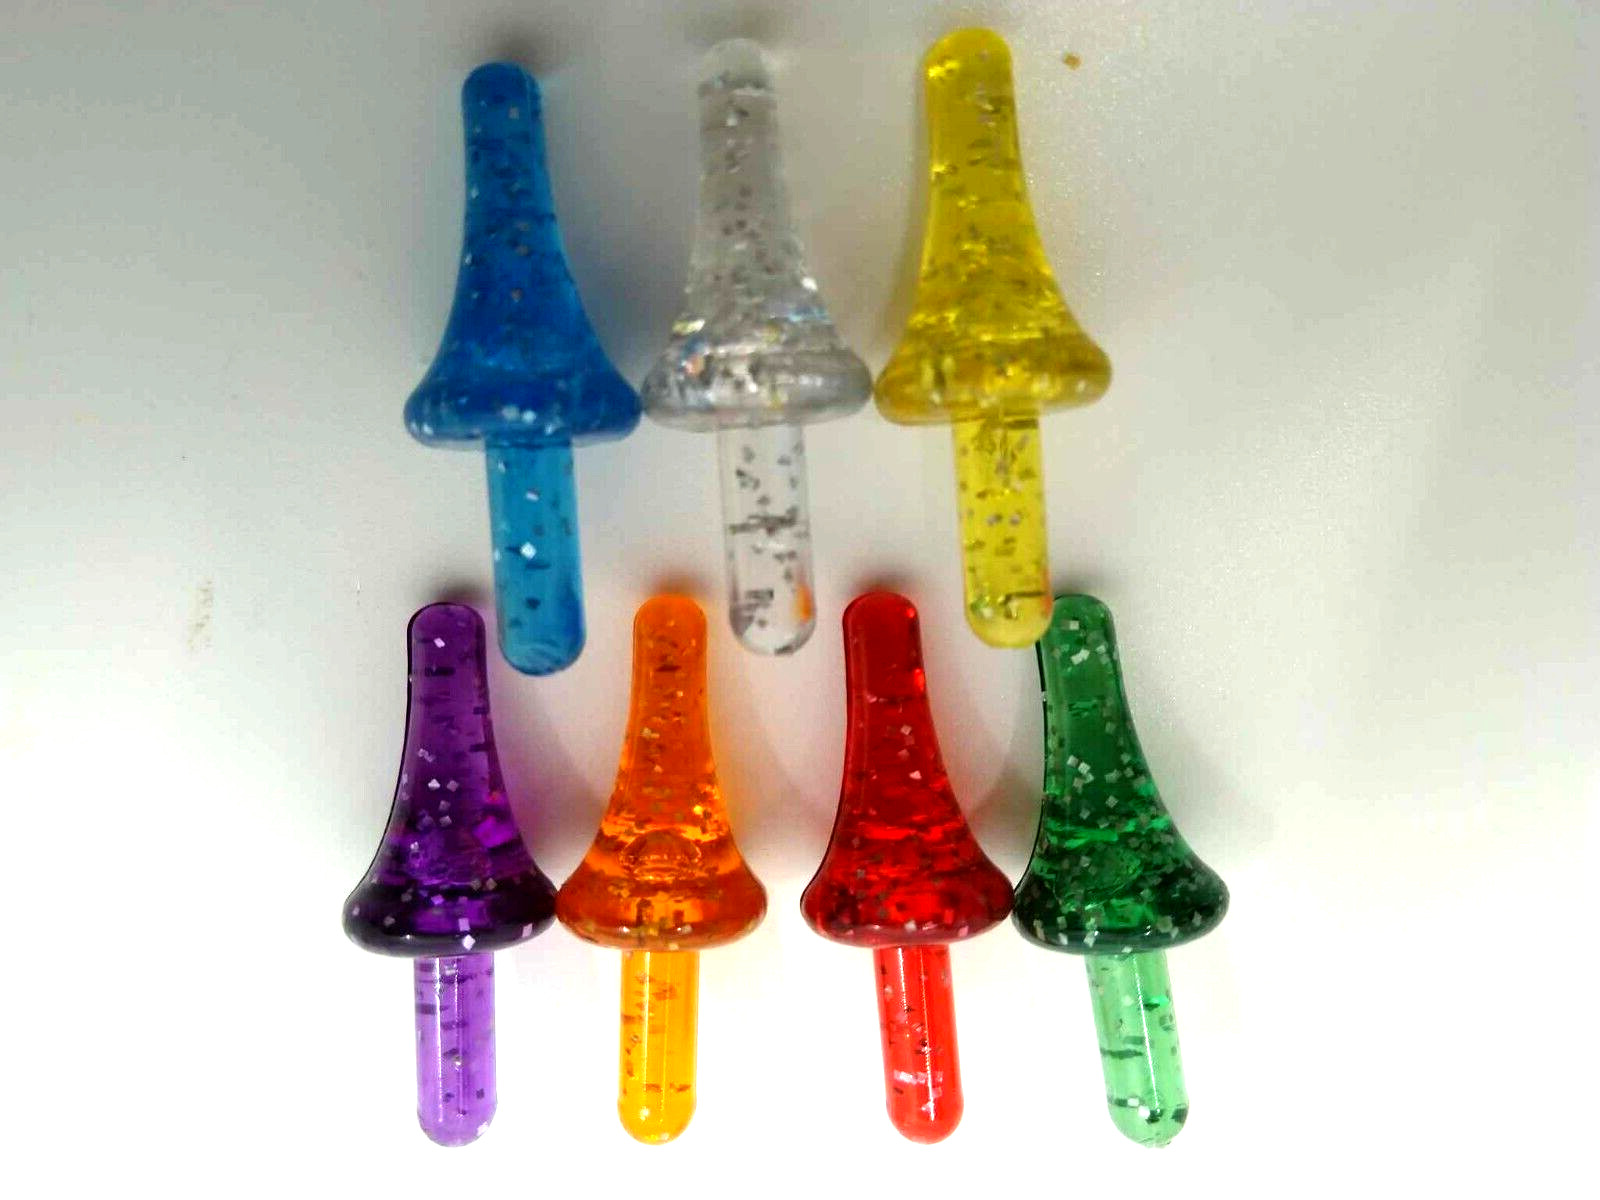 7 Large Mixed Astro Rocket Lights Bulbs with Glitter for Ceramic Christmas Tree